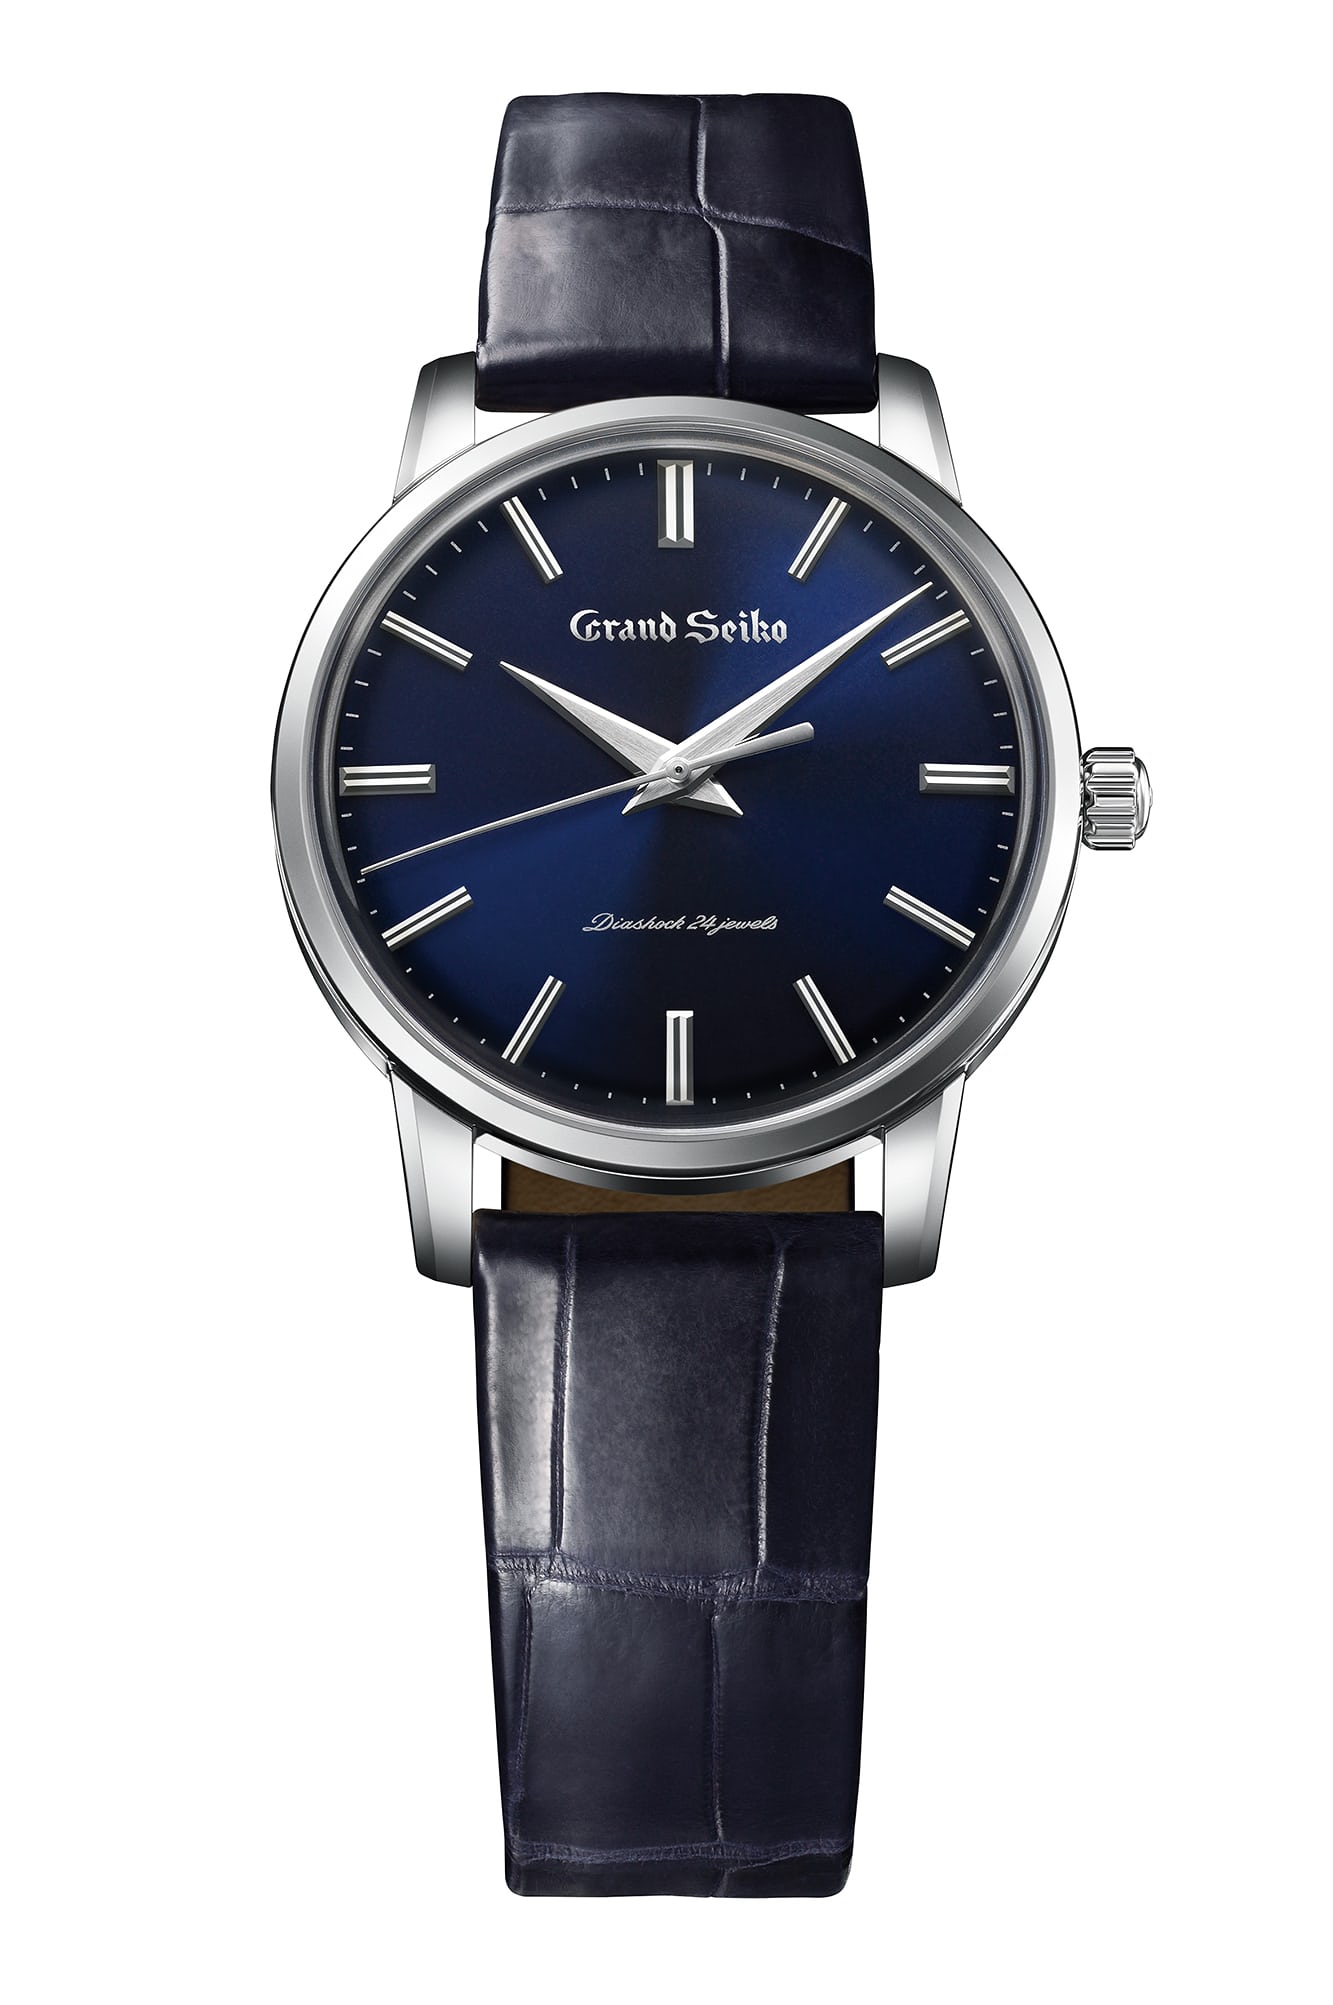 Introducing The Re-Creations Of The First Grand Seiko For The 60th  Anniversary Of GS - SBGW259, SBGW258, SBGW257